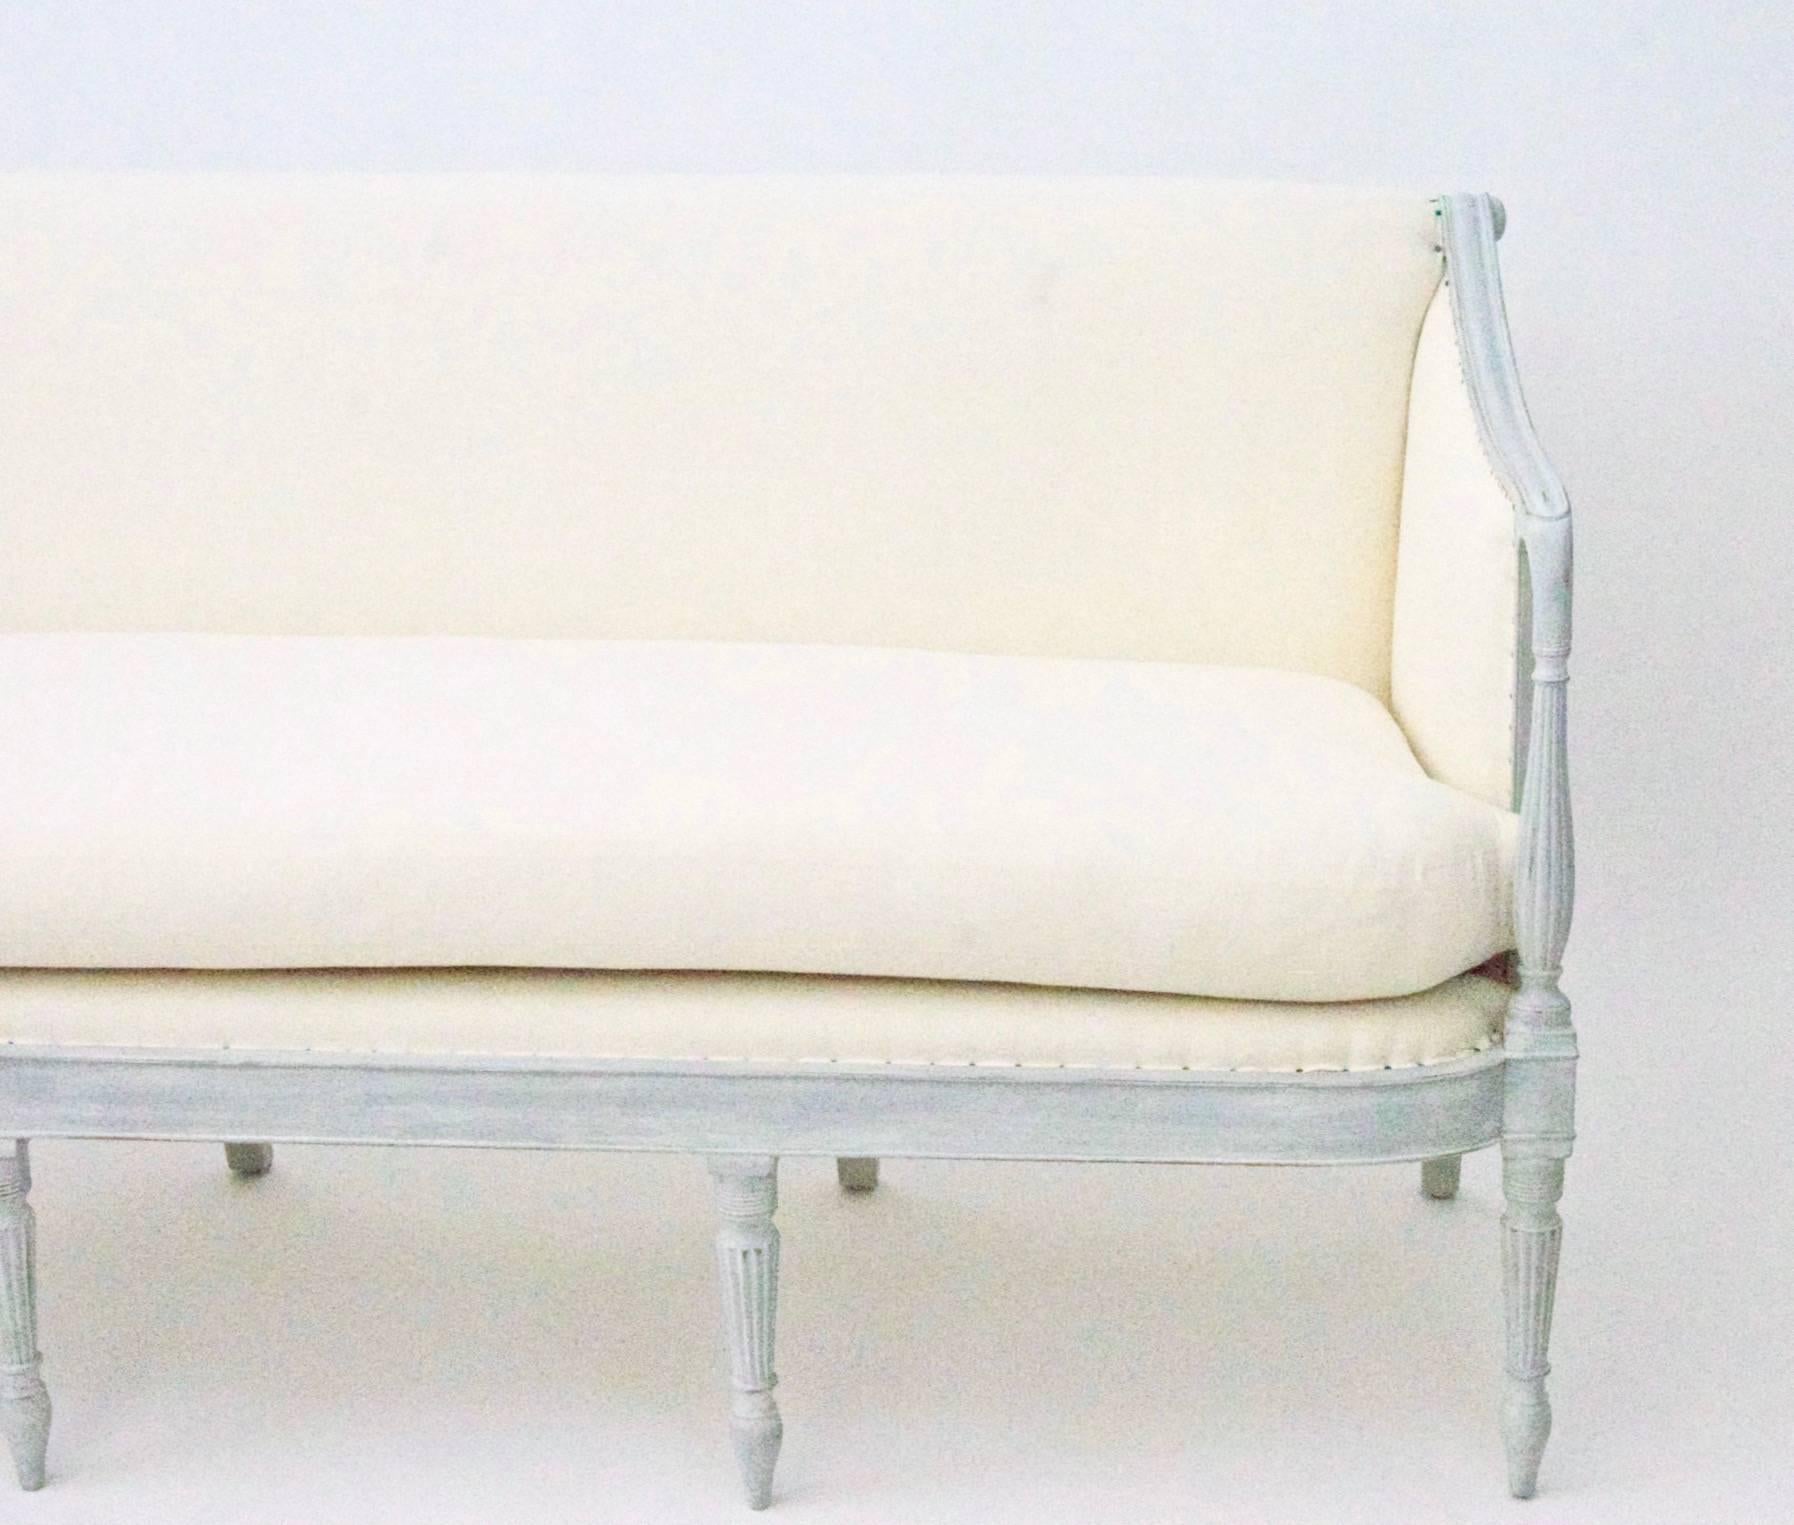 This vintage Federal Sofa is newly upholstered in muslin. Mahogany frame newly painted in a grey finish. The cushion is made up of an extremely comfortable 50-50 down and feather wrap over medium firm foam core interior. 

Inquire about